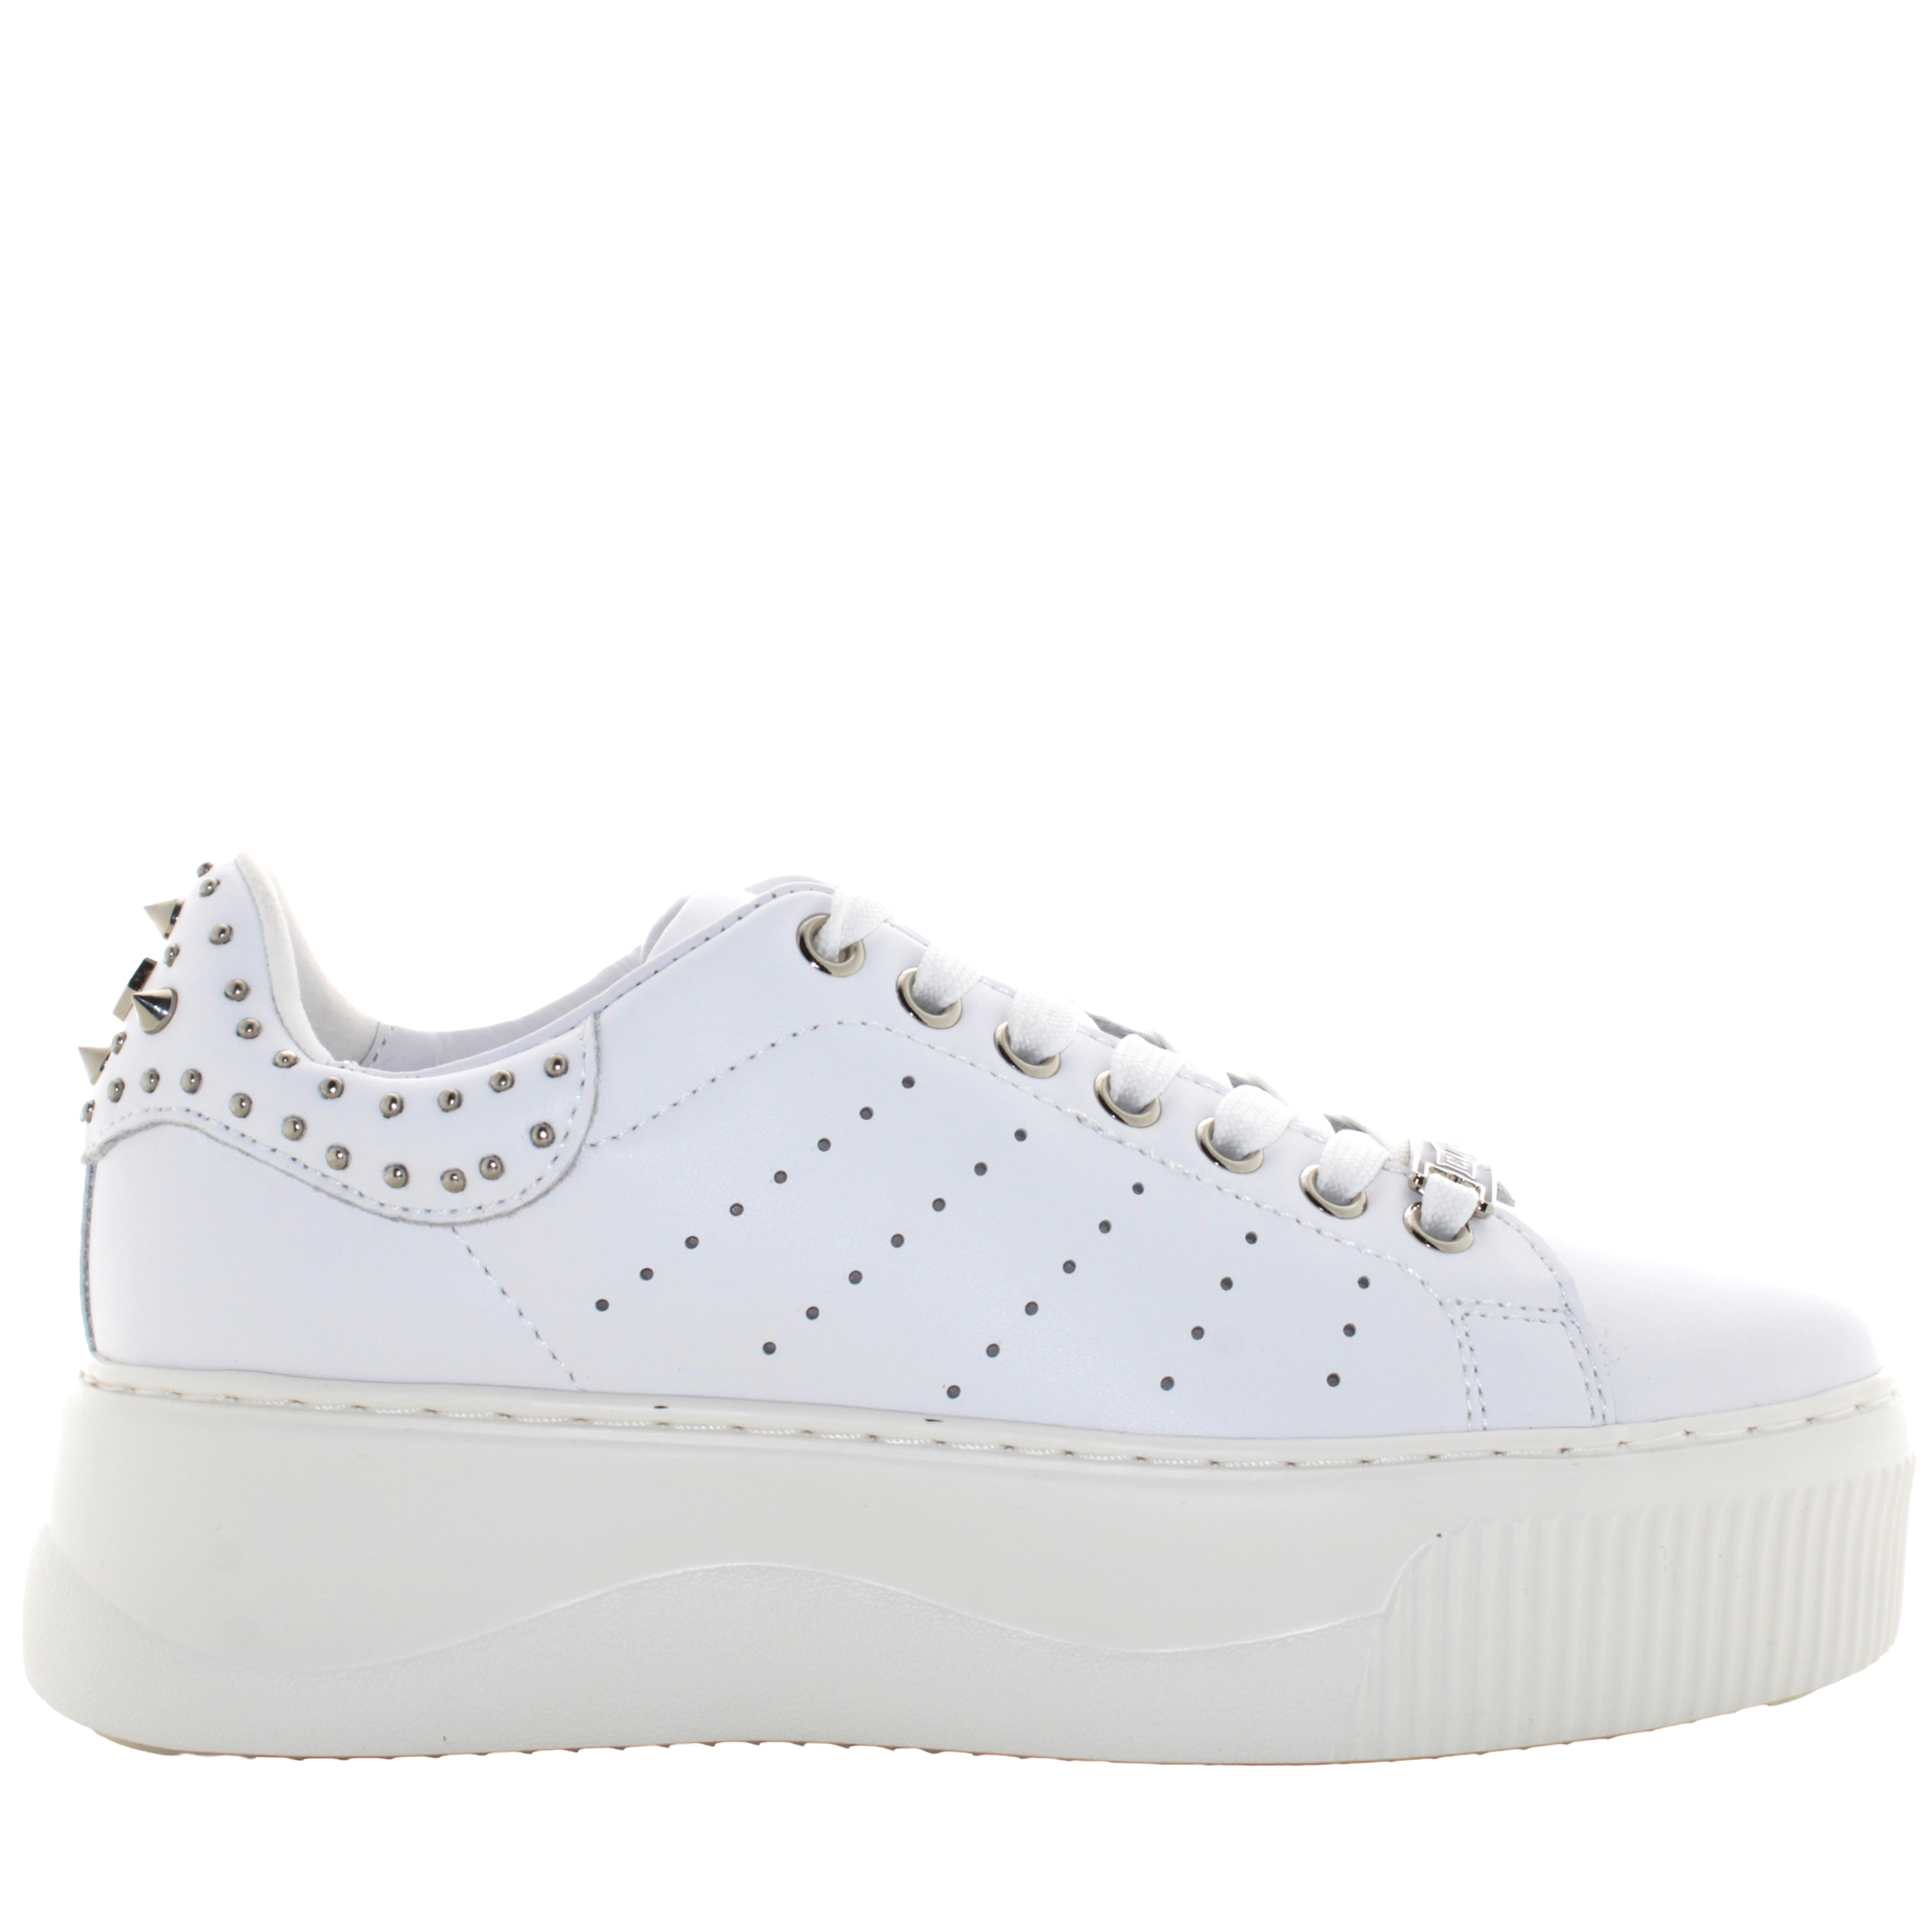 Cult sneakers donna CLW423600 PERRY 4236 LOW W LEATHER P24